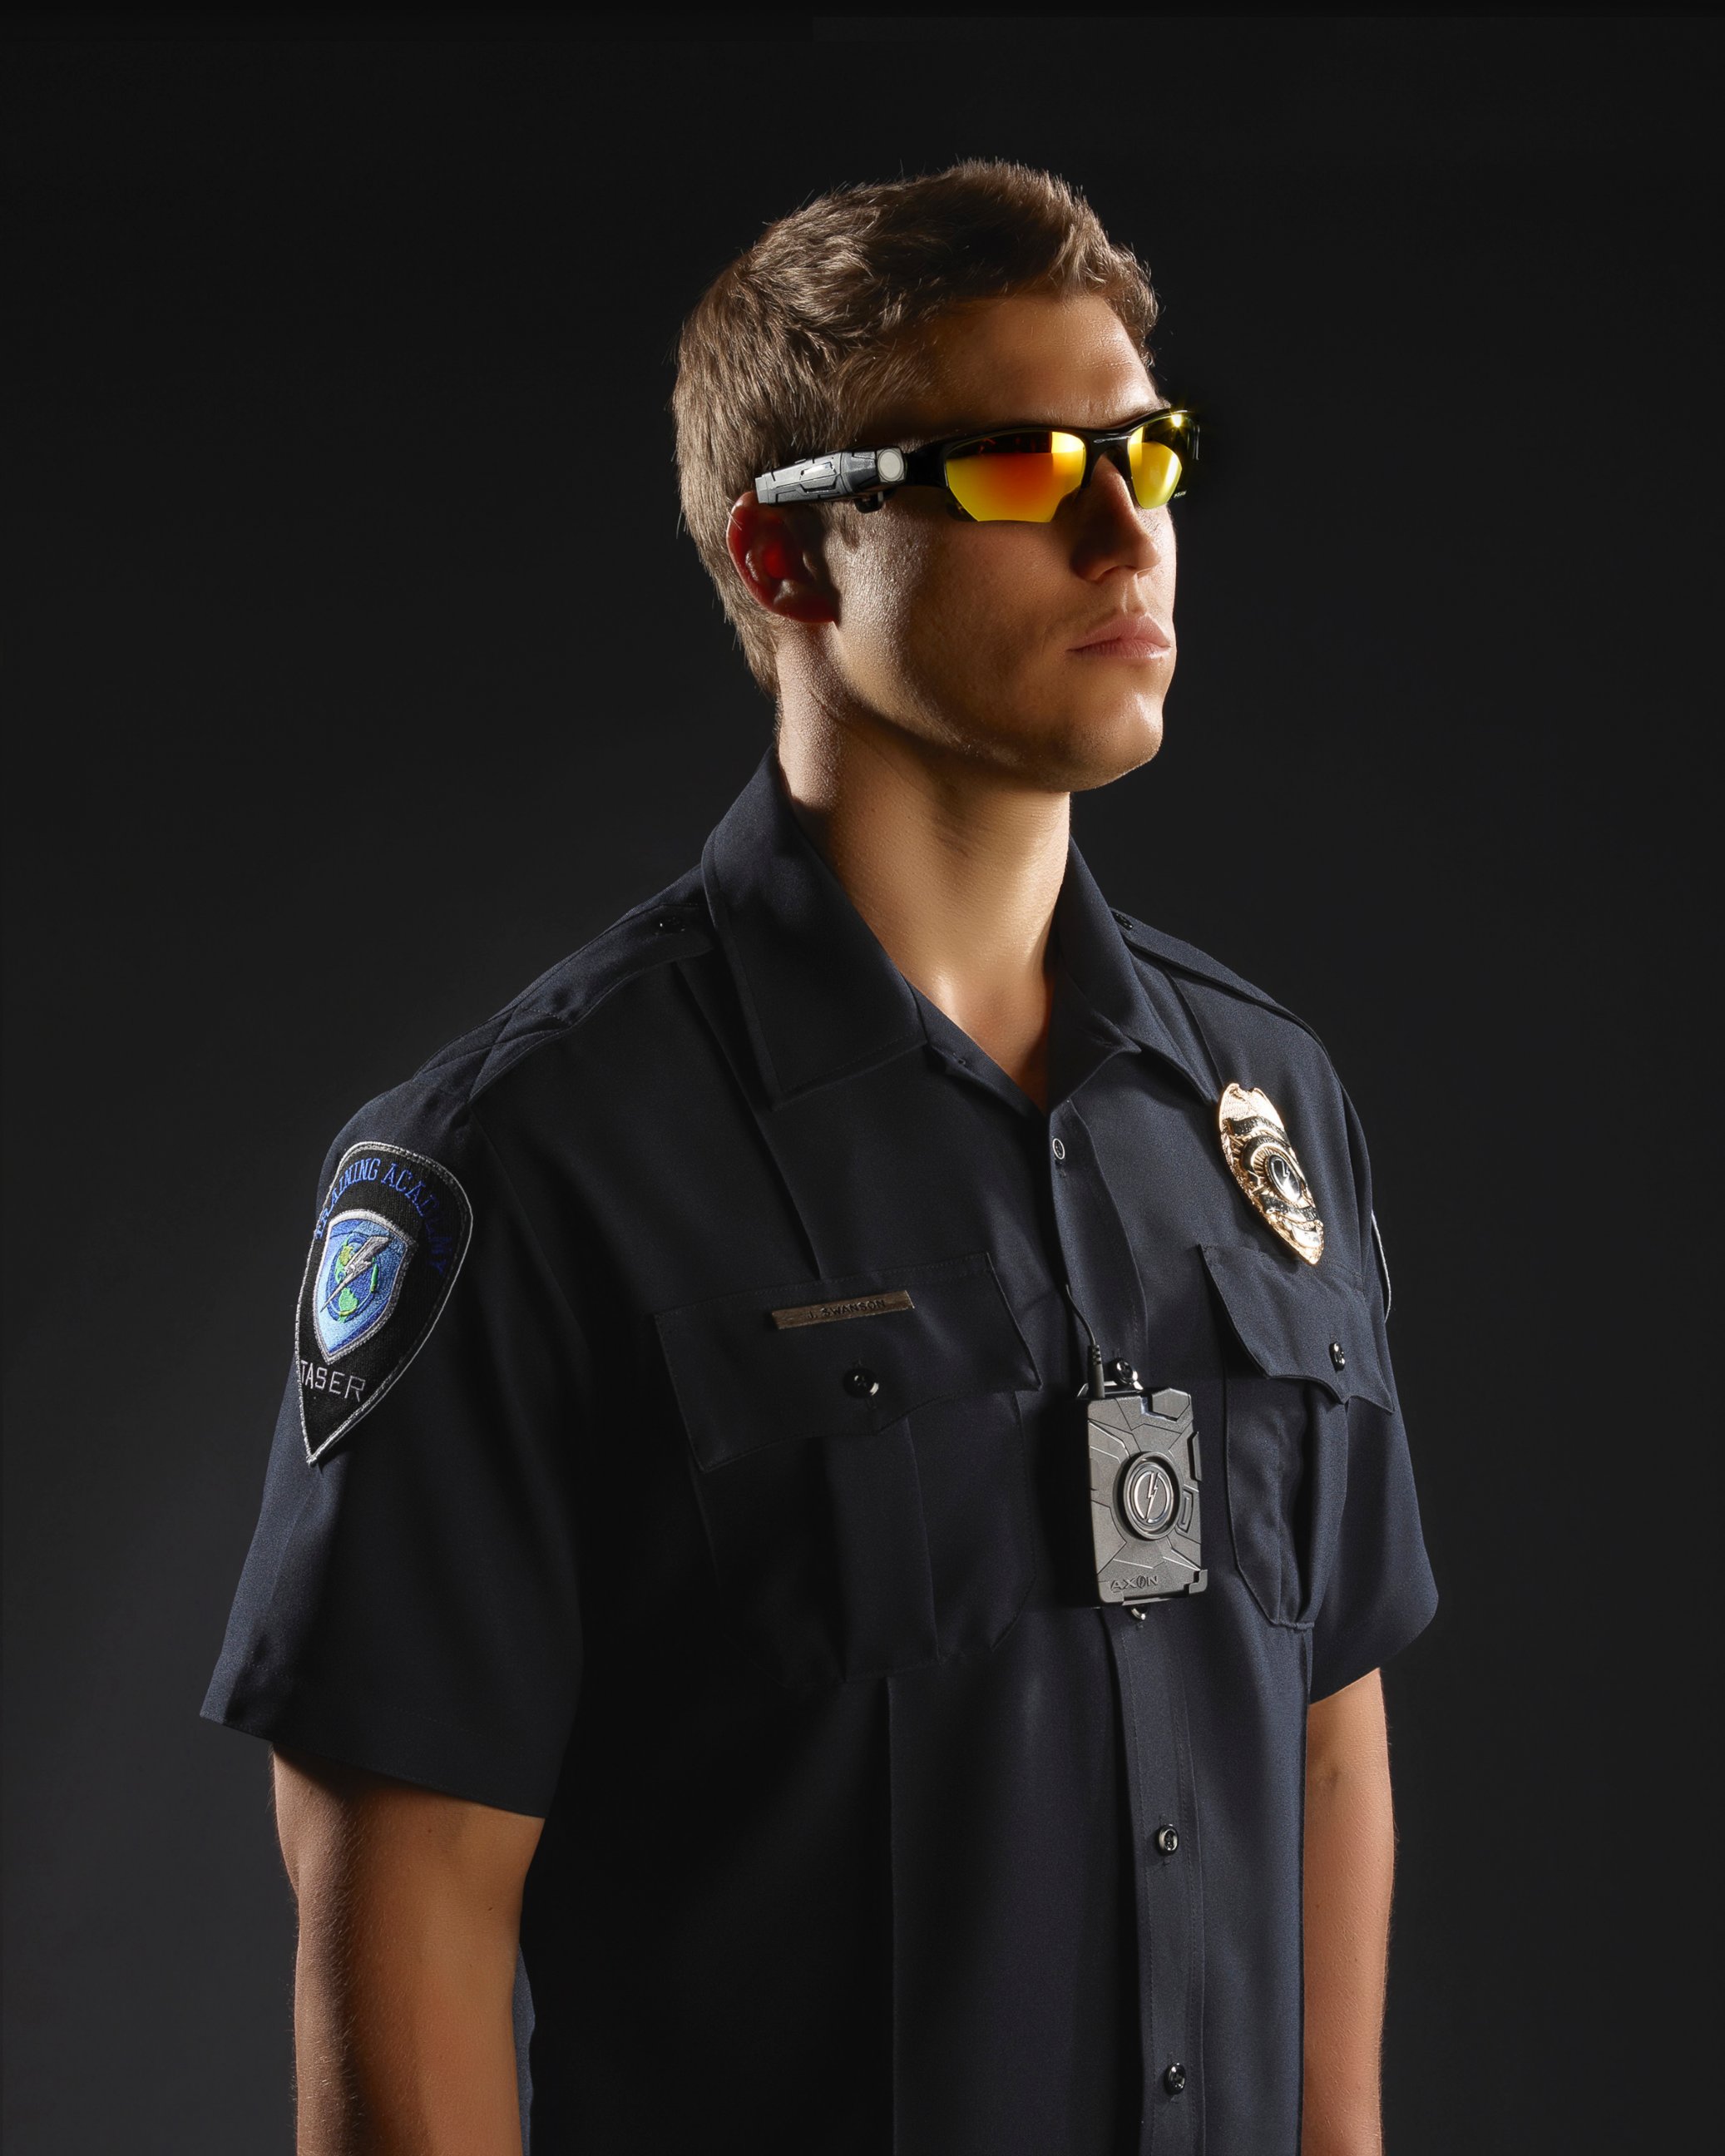 PHOTO: The AXON flex body camera is seen in this product photo.